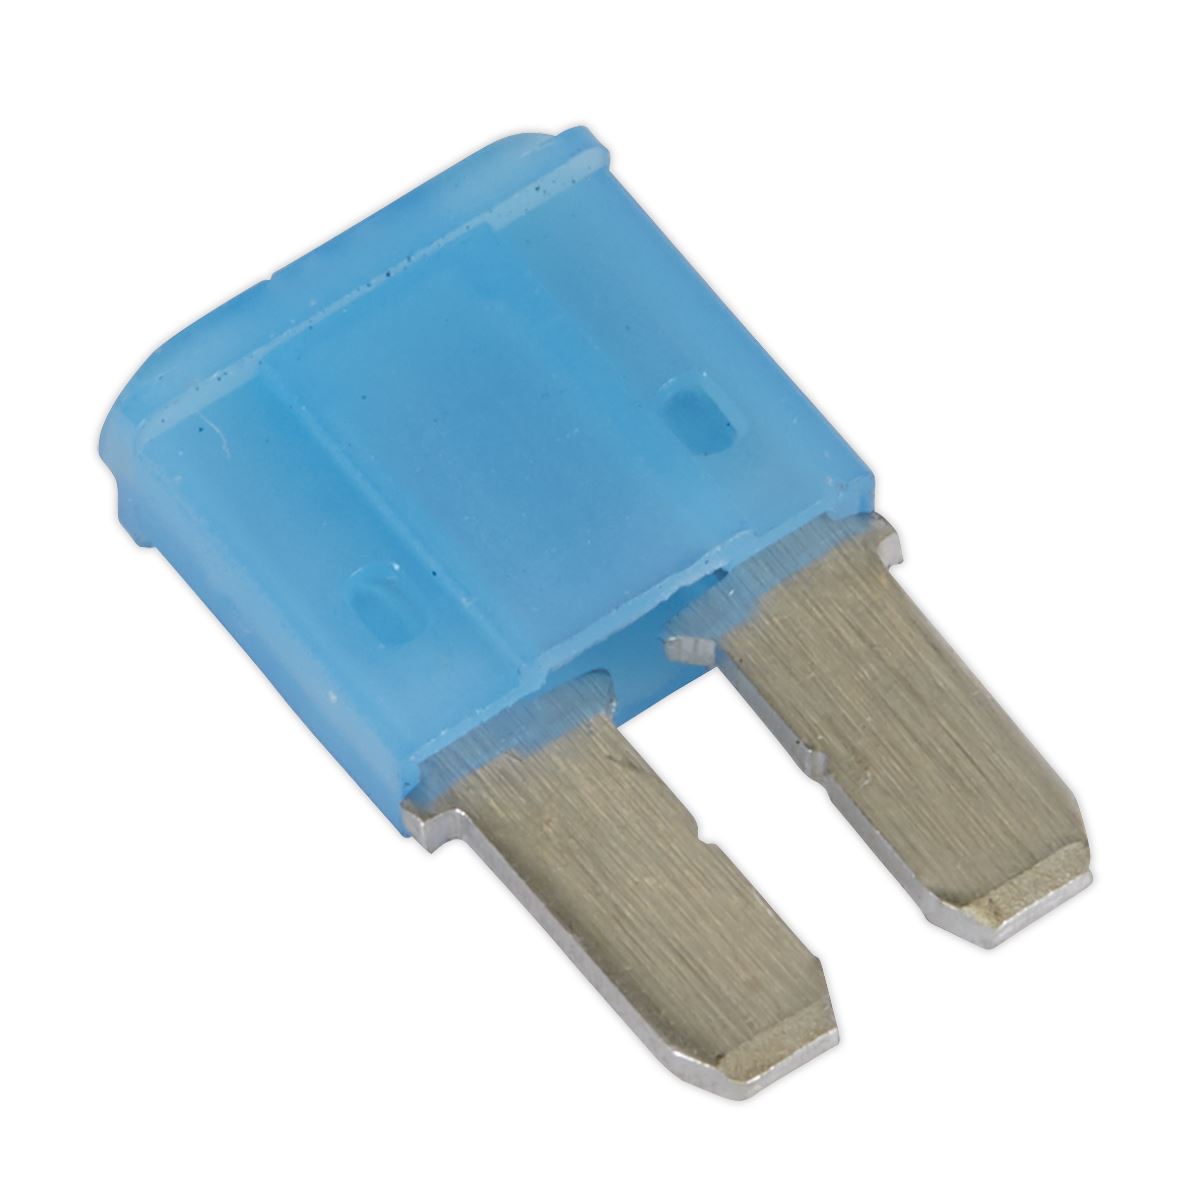 Sealey Automotive MICRO II Blade Fuse 15A - Pack of 50